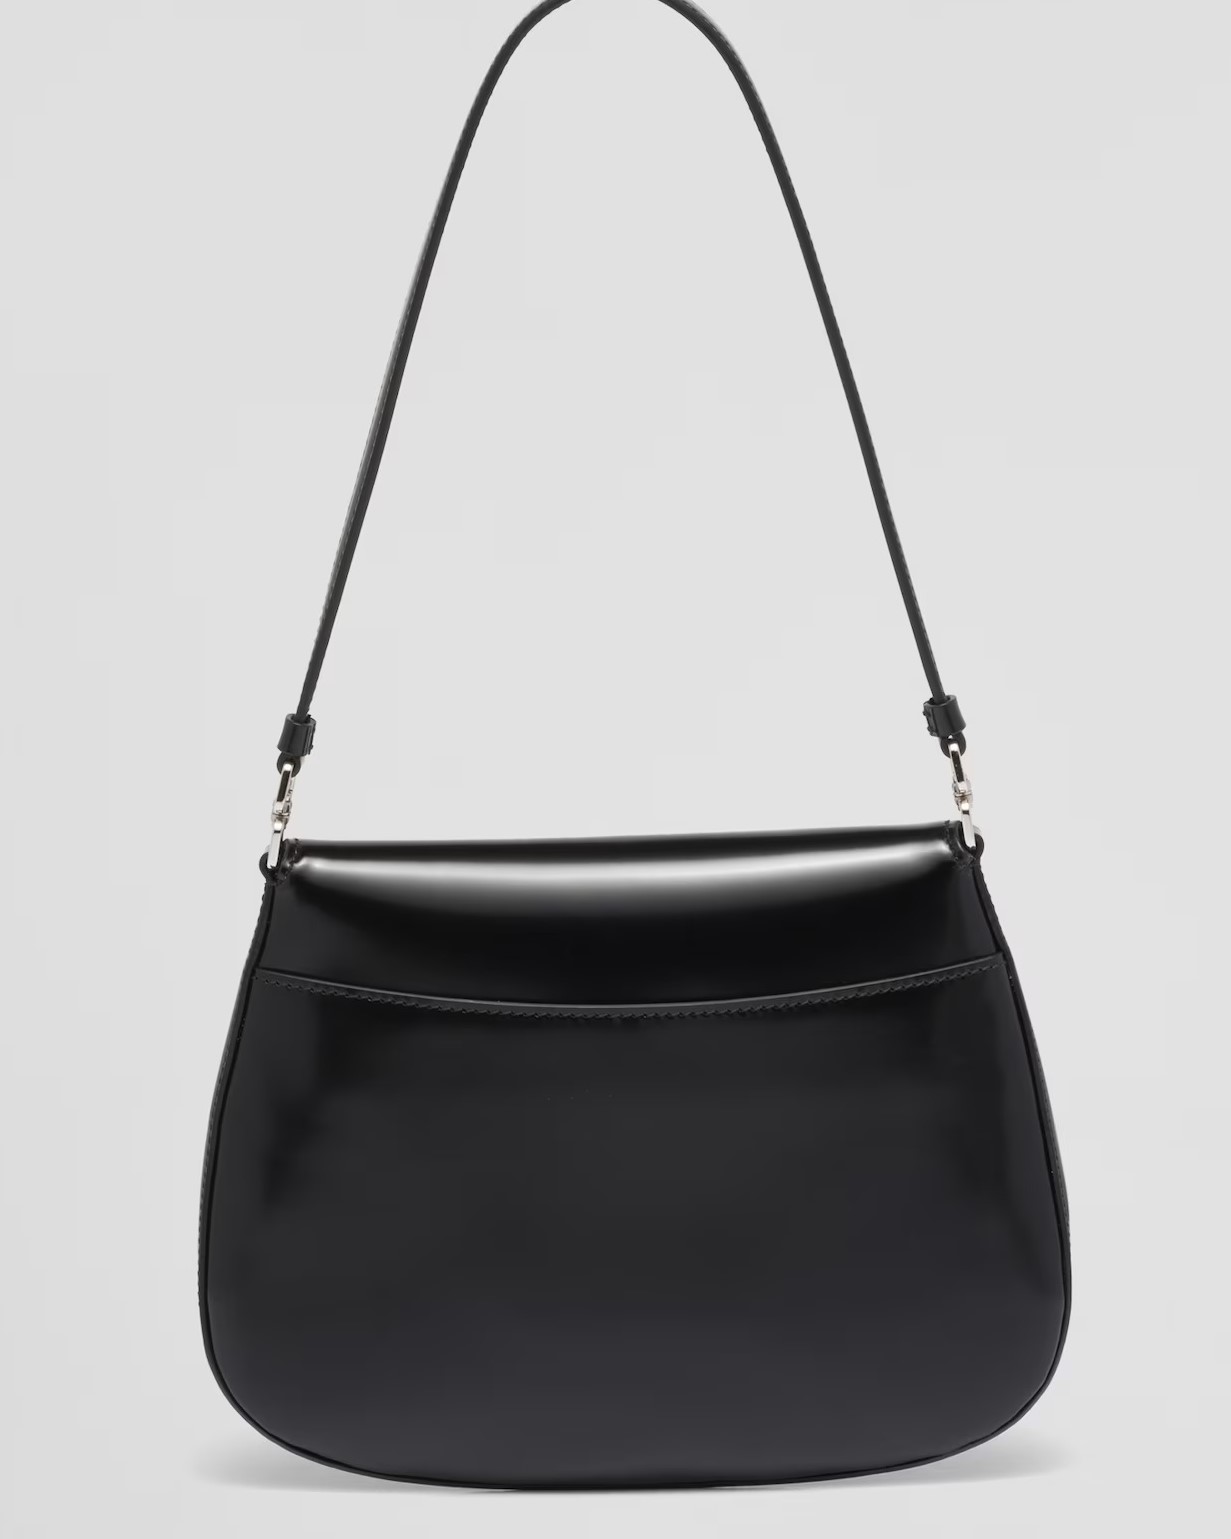 TÚI XÁCH PRADA CLEO BRUSHED LEATHER SHOULDER BAG WITH FLAP 17